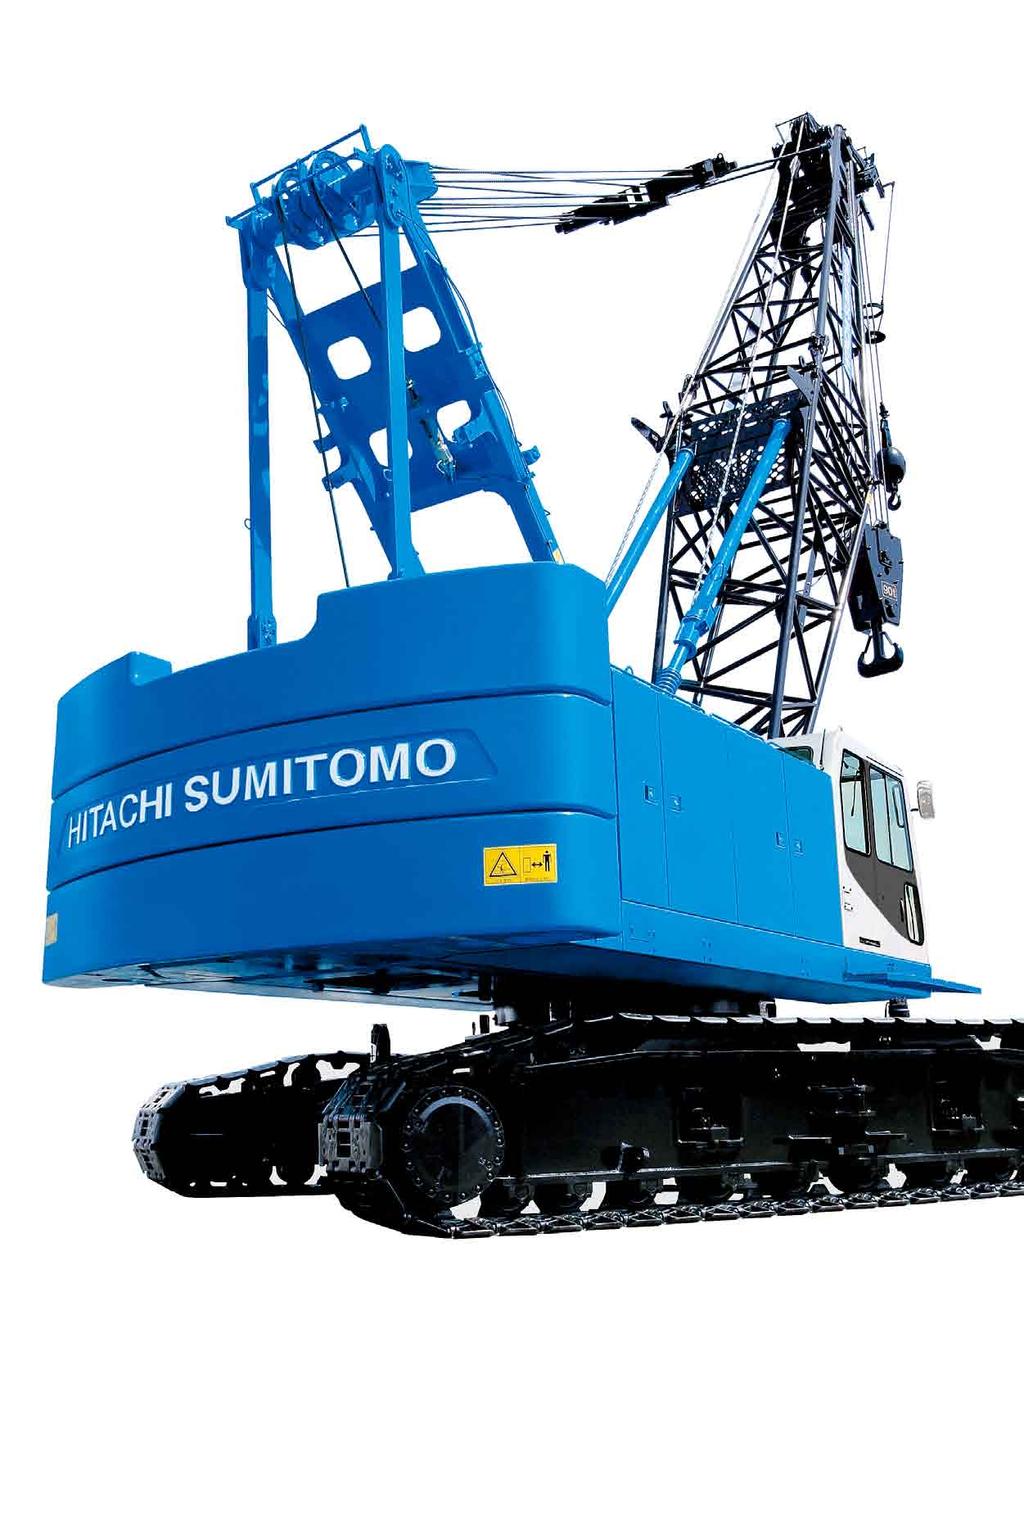 The New World Standard SCX900-2 Setting New Standards of Crane Productivity and Profitability 2 Hitachi and Suitoo have blended the best of their technologies to create the New World Standard Crane.